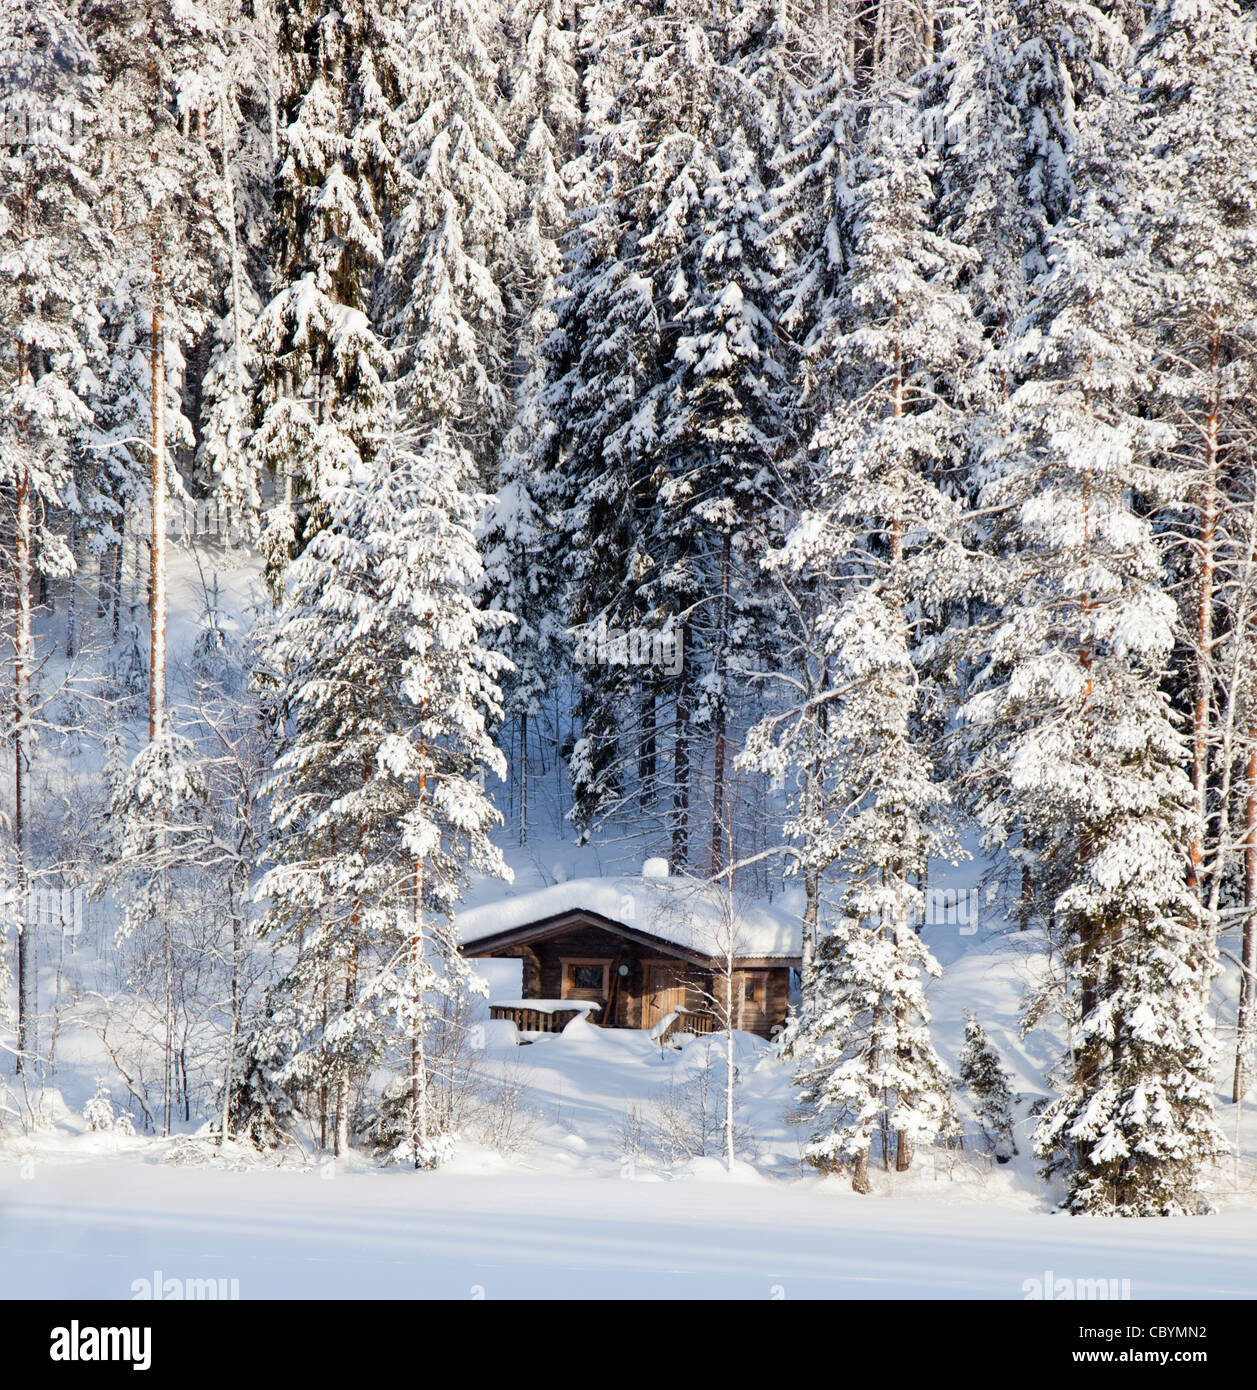 Small wooden sauna cabin made of logs in the snowy taiga forest by a frozen  lake at Winter , Finland Stock Photo - Alamy